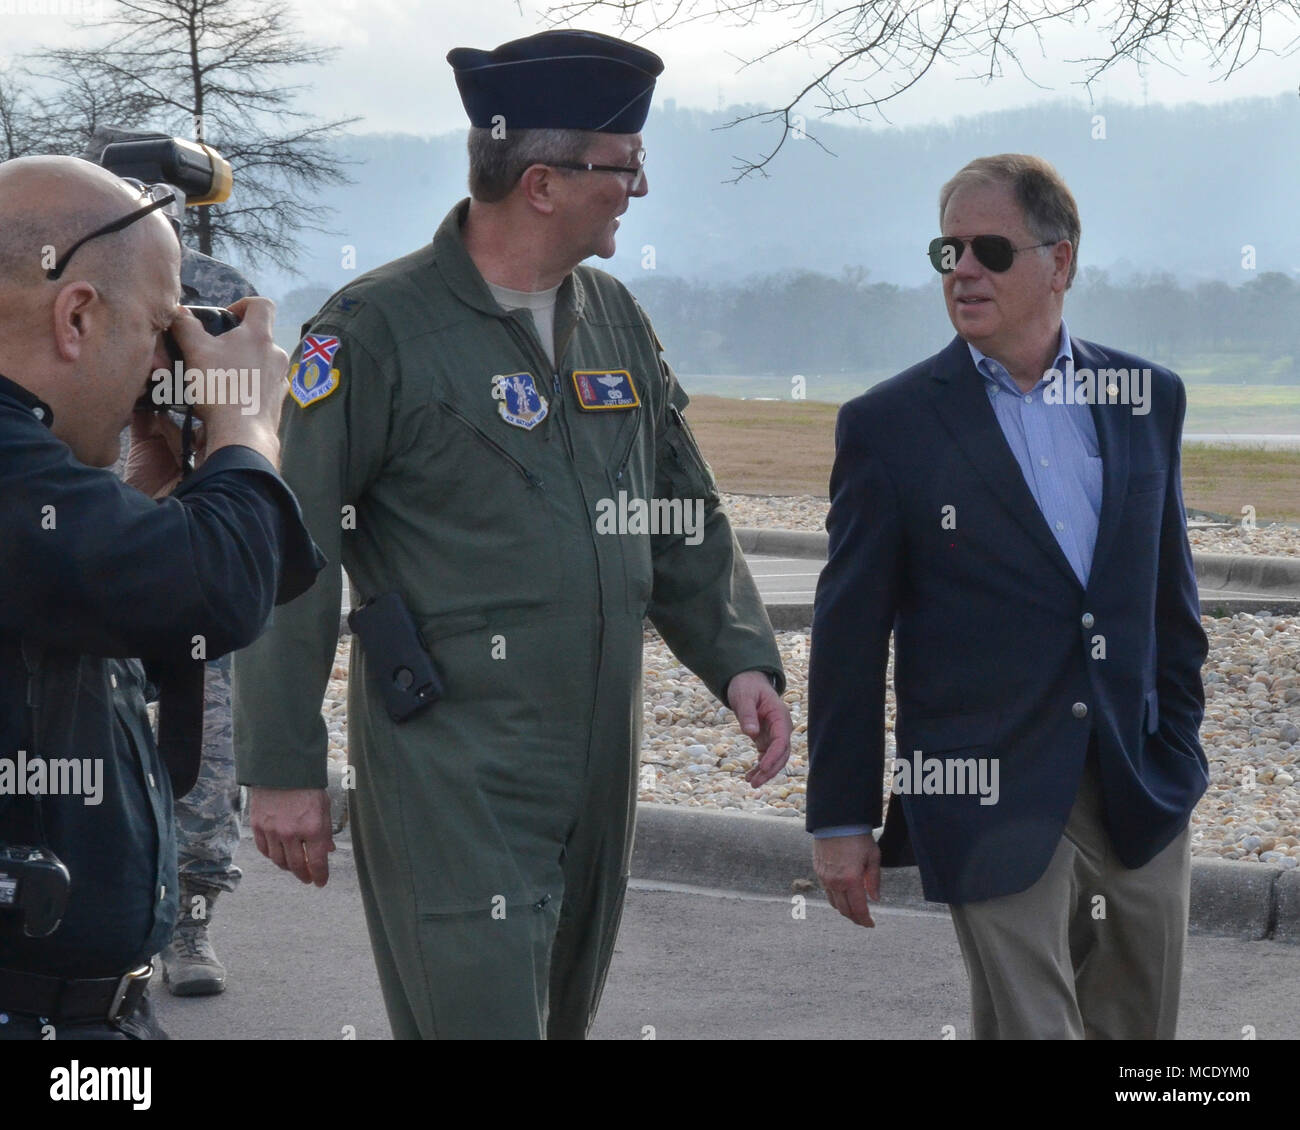 Alabama Sen. Doug Jones visits the 117th Air Refueling Wing here at Sumpter Smith Air National Guard Base, Birmingham, Ala. on February 21, 2018.  (U.S. Air National Guard photo by: Staff Sgt. Jim Bentley) Stock Photo